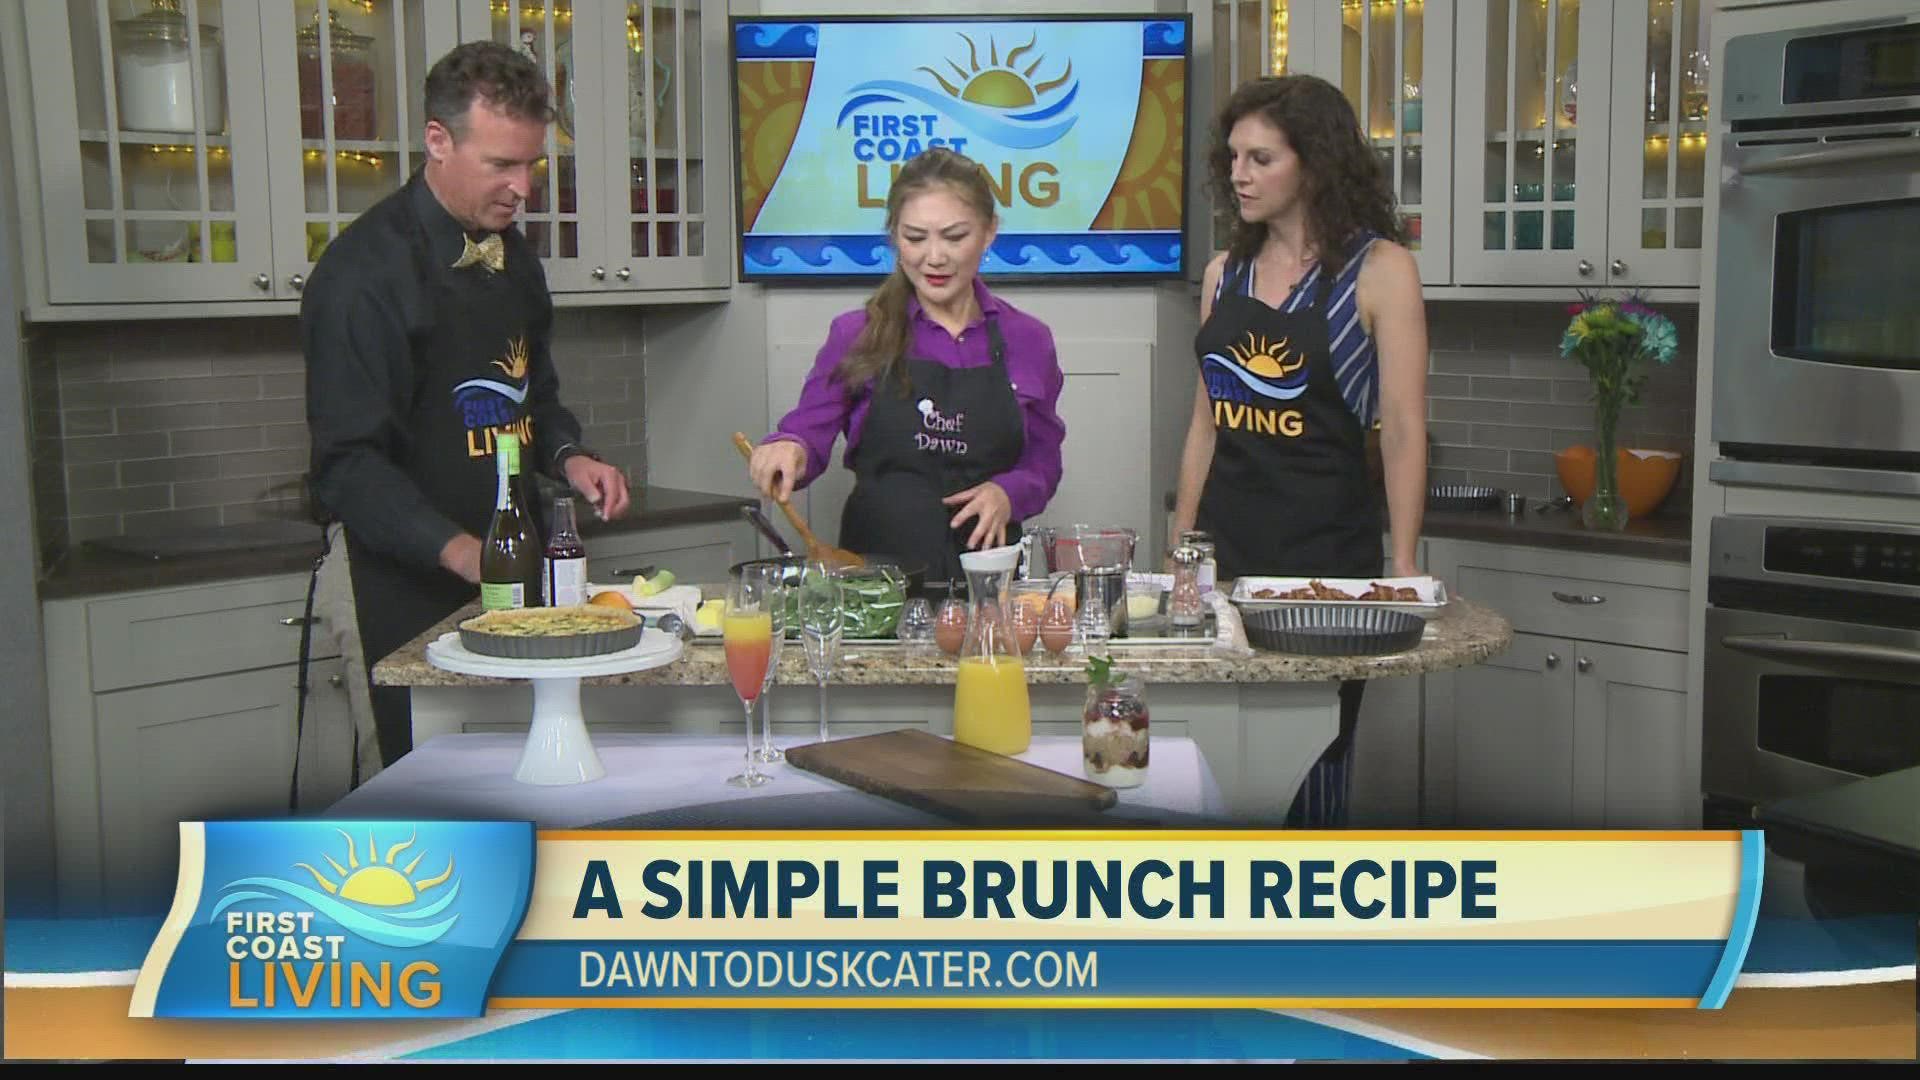 Chef Dawn Archer of "Dawn to Dusk Catering" shows Mike and Jordan how to make a three-cheese quiche with bacon, leek and spinach.